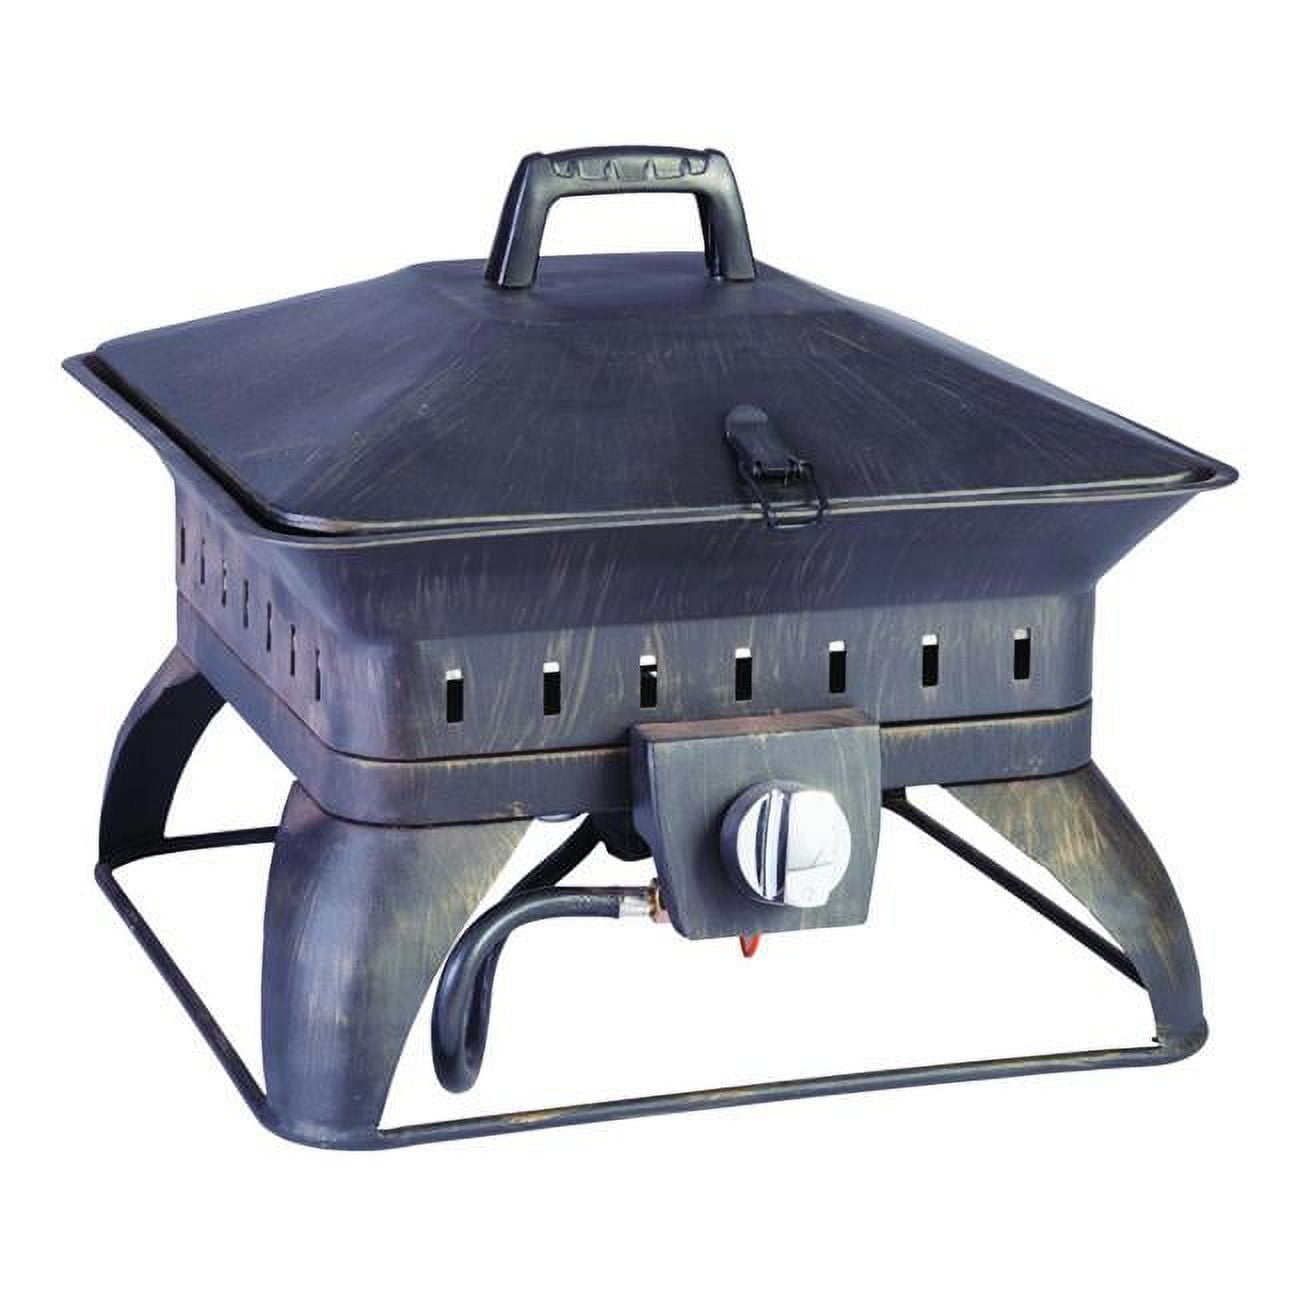 4794061 Porcelain & Steel Square Portable Propane Fire Pit - 14.6 X 18.7 X 18.7 In.